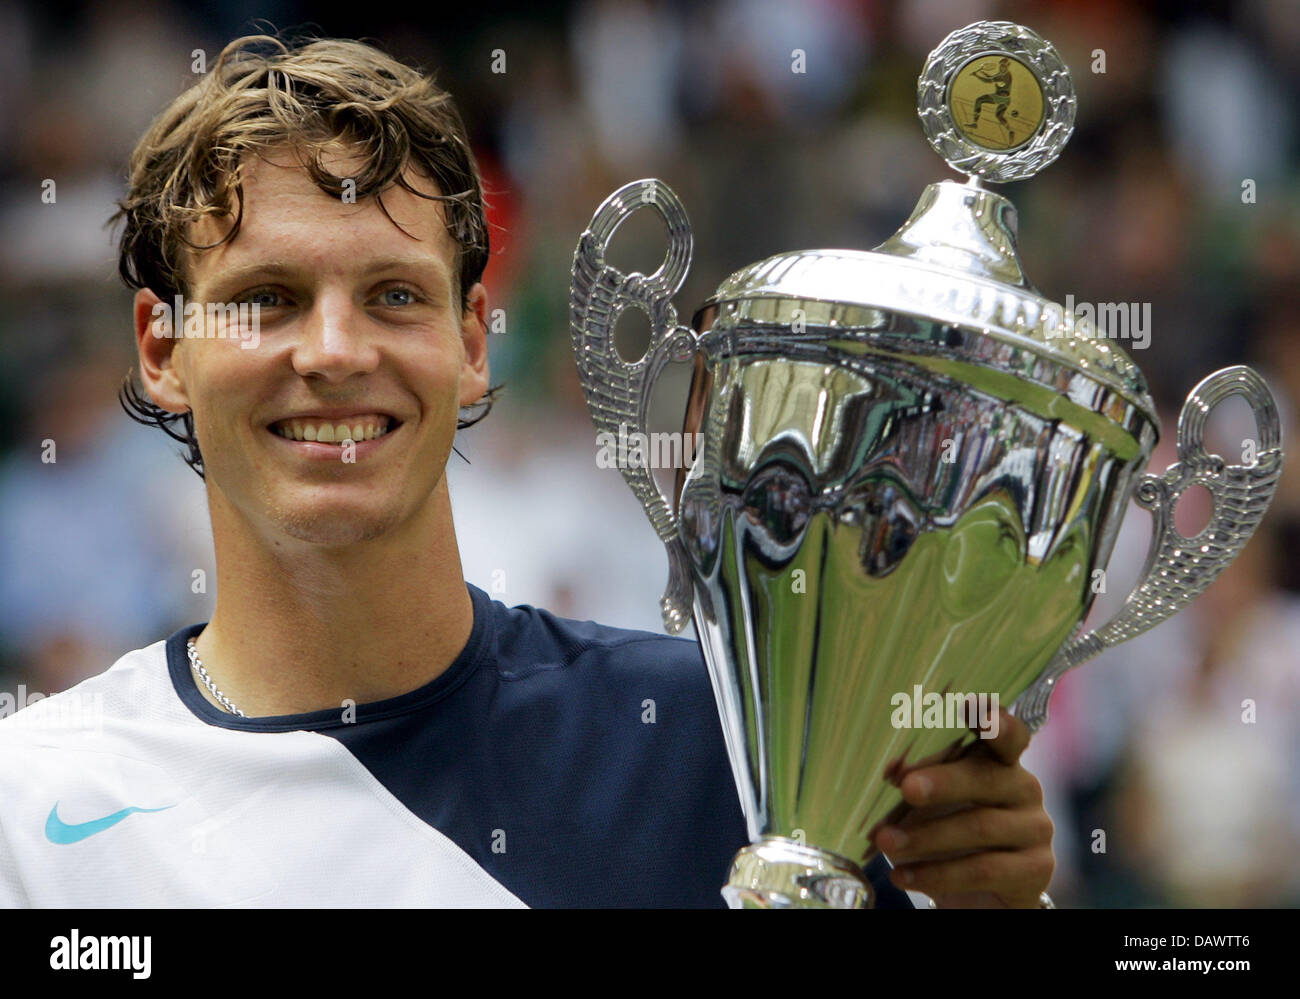 Czech tennis pro Tomas Berdych poses with the trophy for winning the 15th Gerry  Weber Open in Halle/Westfalia, Germany, 17 June 2007. He defeated Cypriot  Marcos Baghdatis 7-5, 6-4 in his Finals